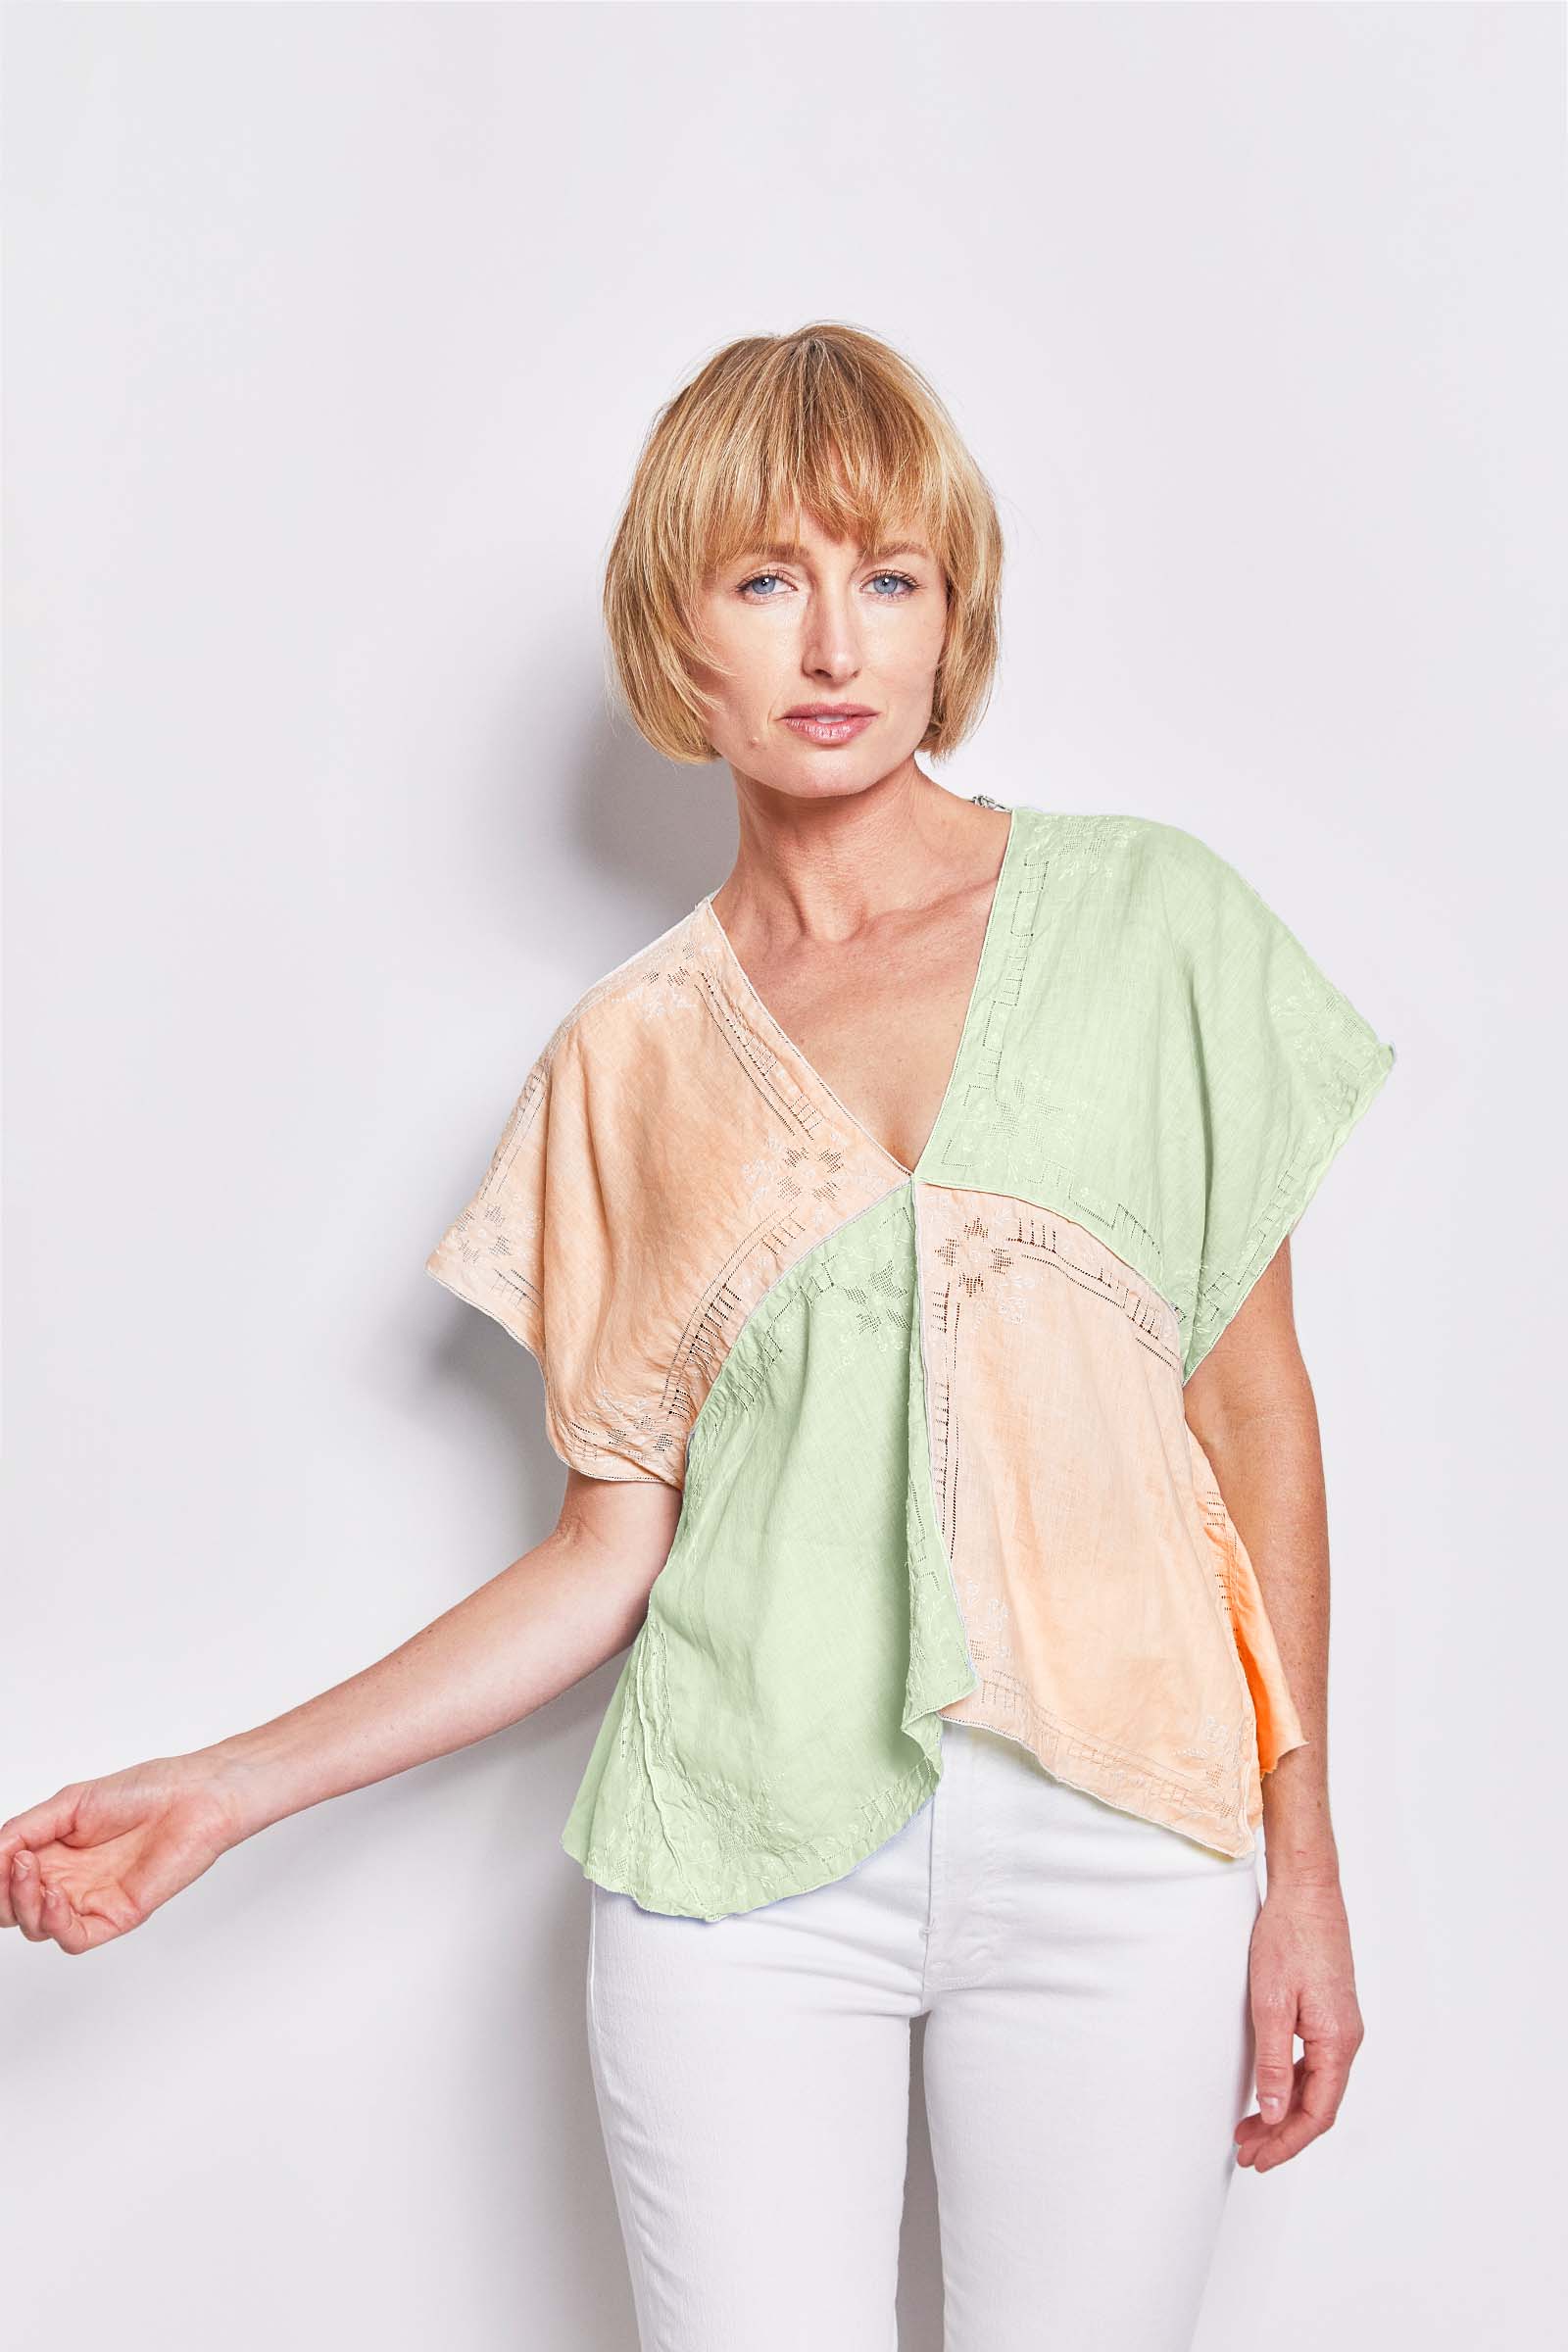 re-luxed re-imagined la lino sustainable linen top.